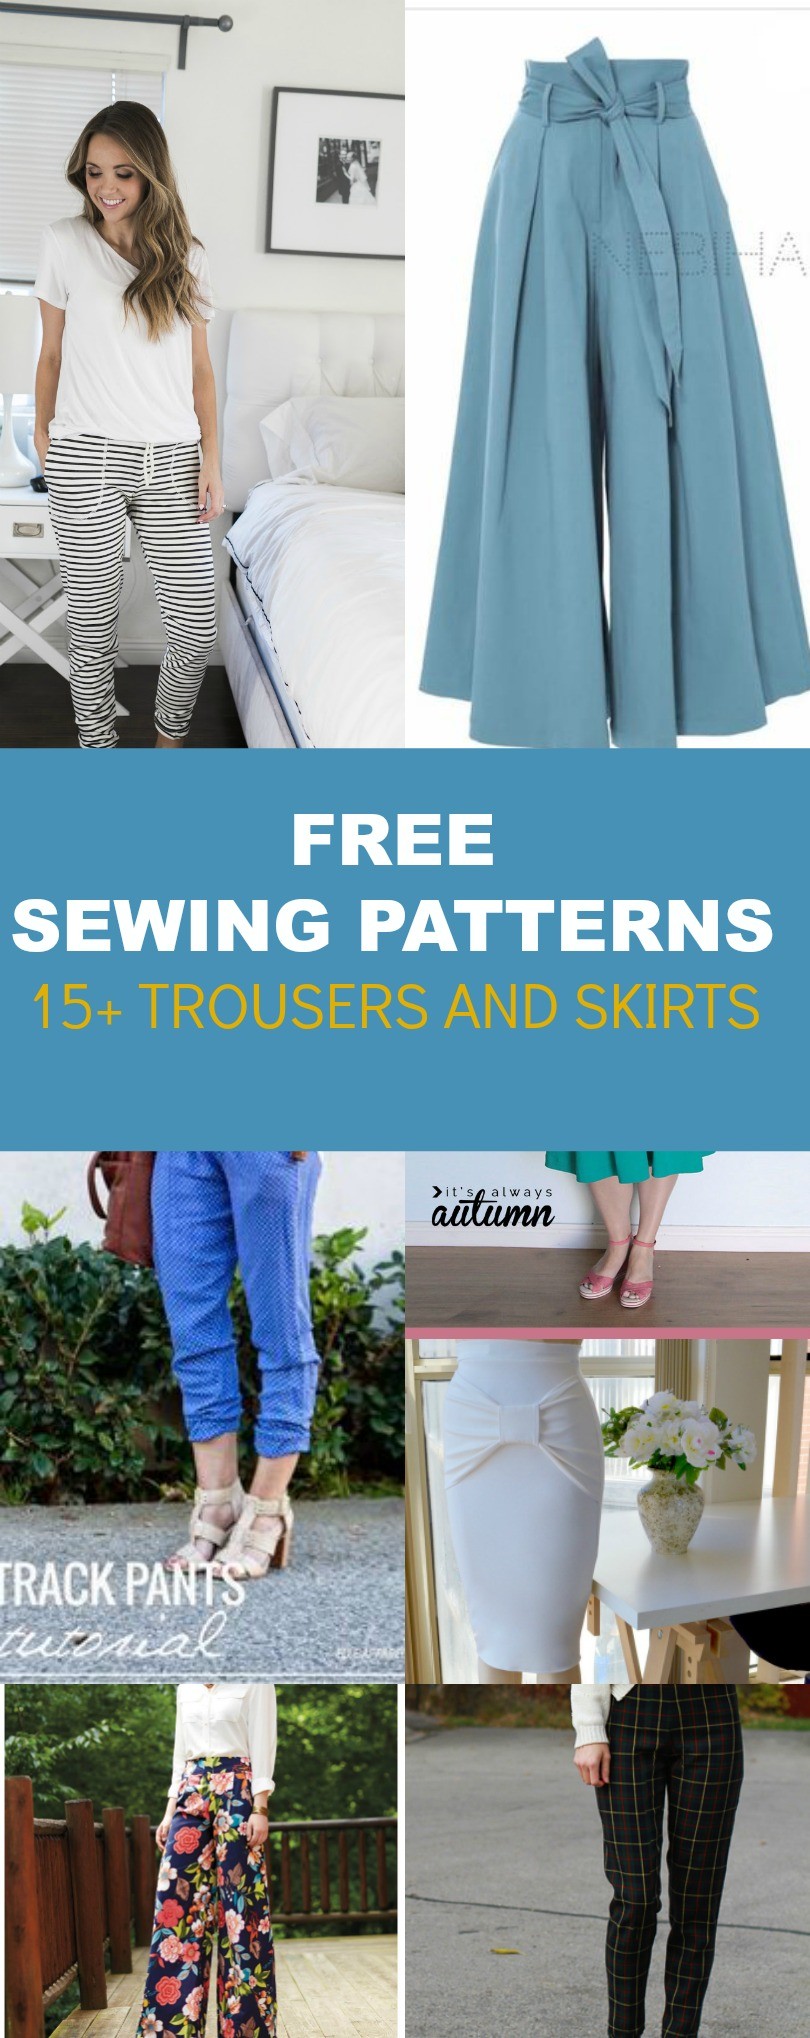 FREE PATTERN ALERT: 15+ Pants and Skirts Sewing Tutorials  On the Cutting  Floor: Printable pdf sewing patterns and tutorials for women